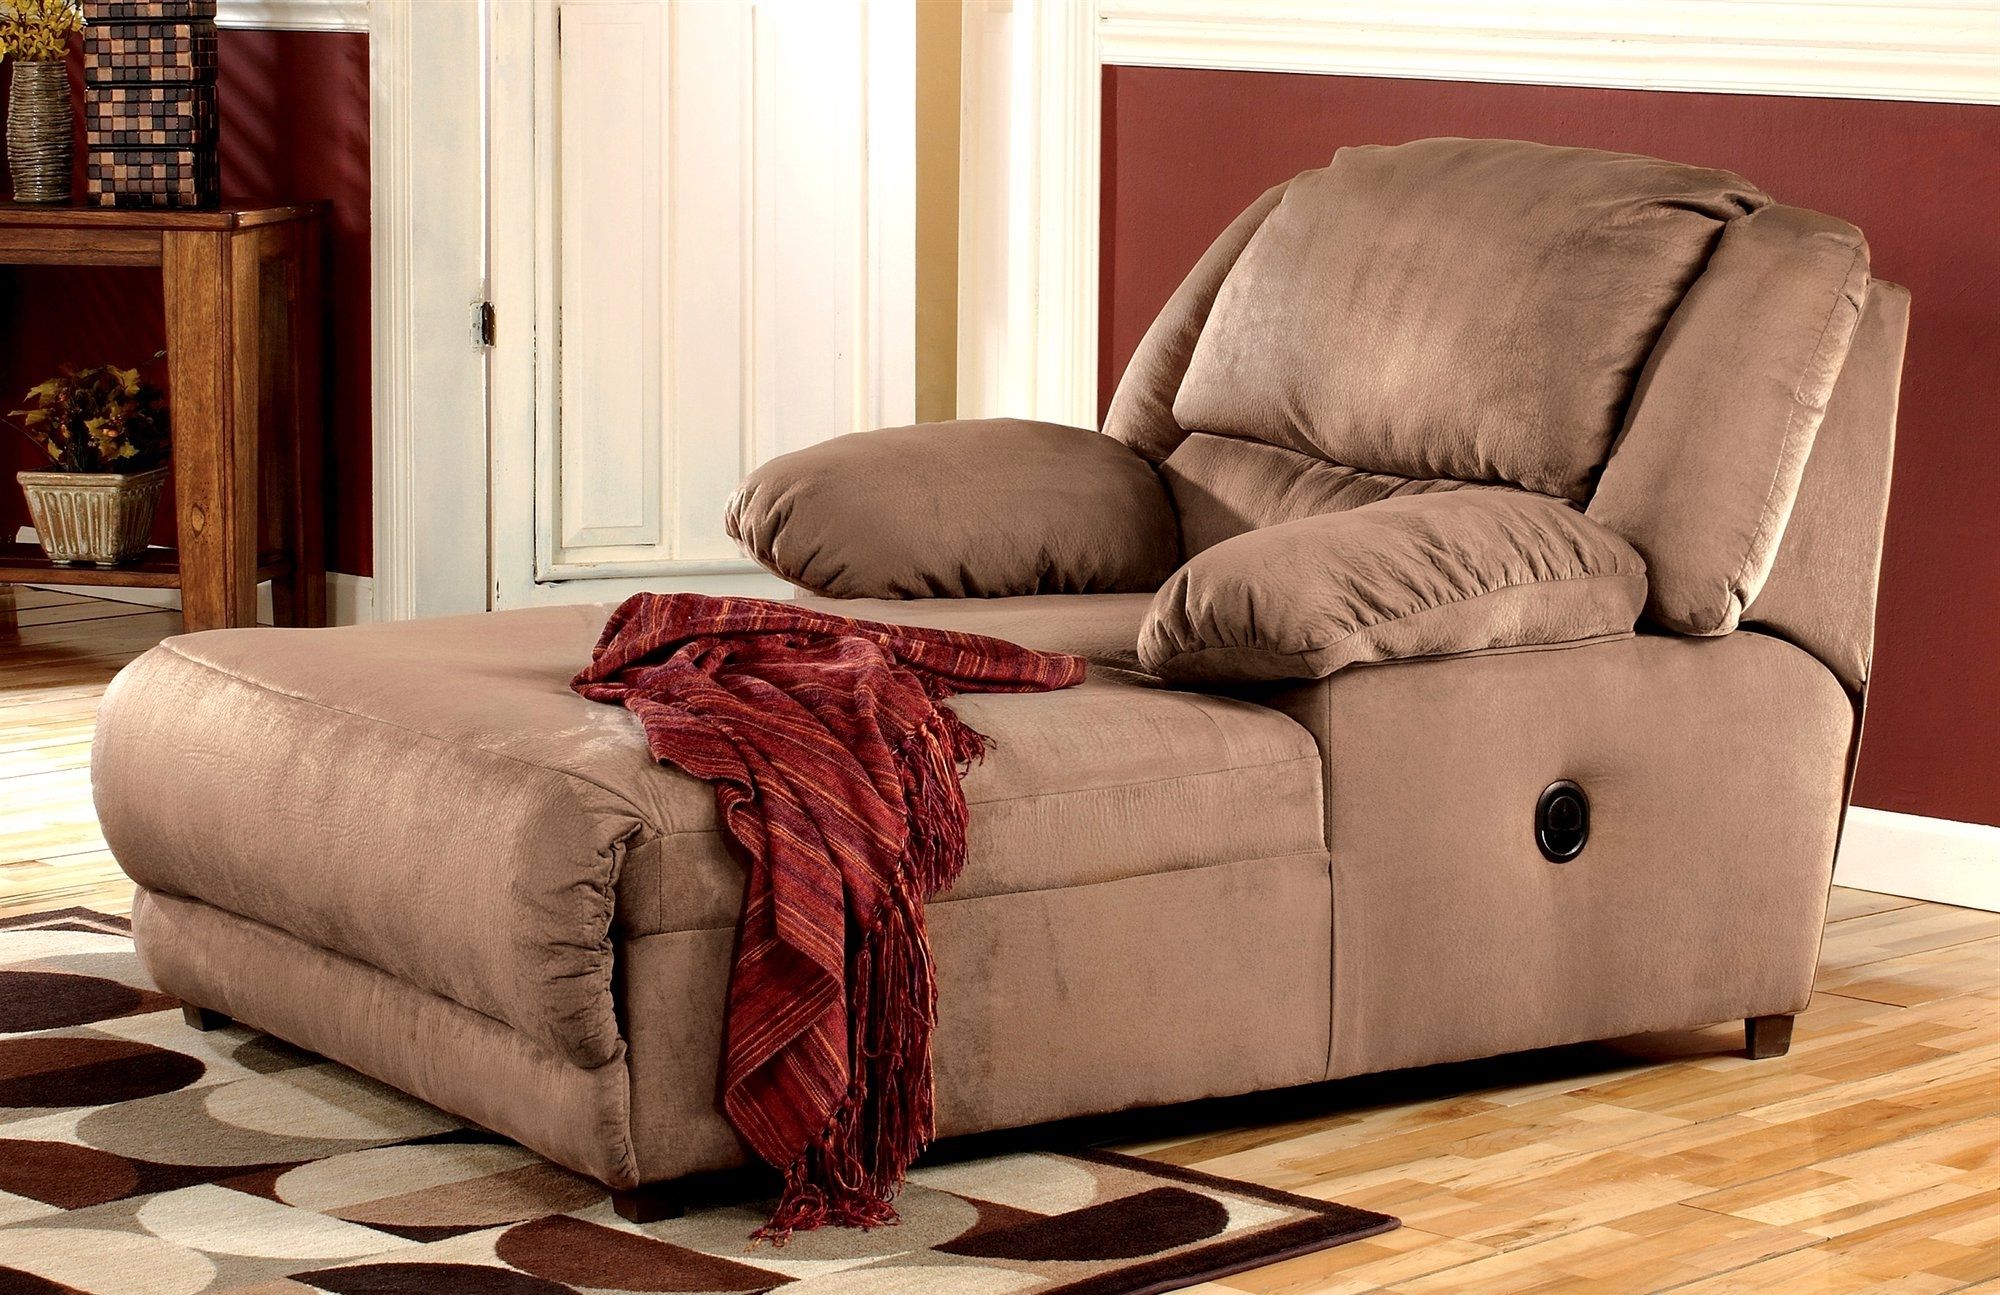 Leather Chaise Lounge Chairs For Living Room